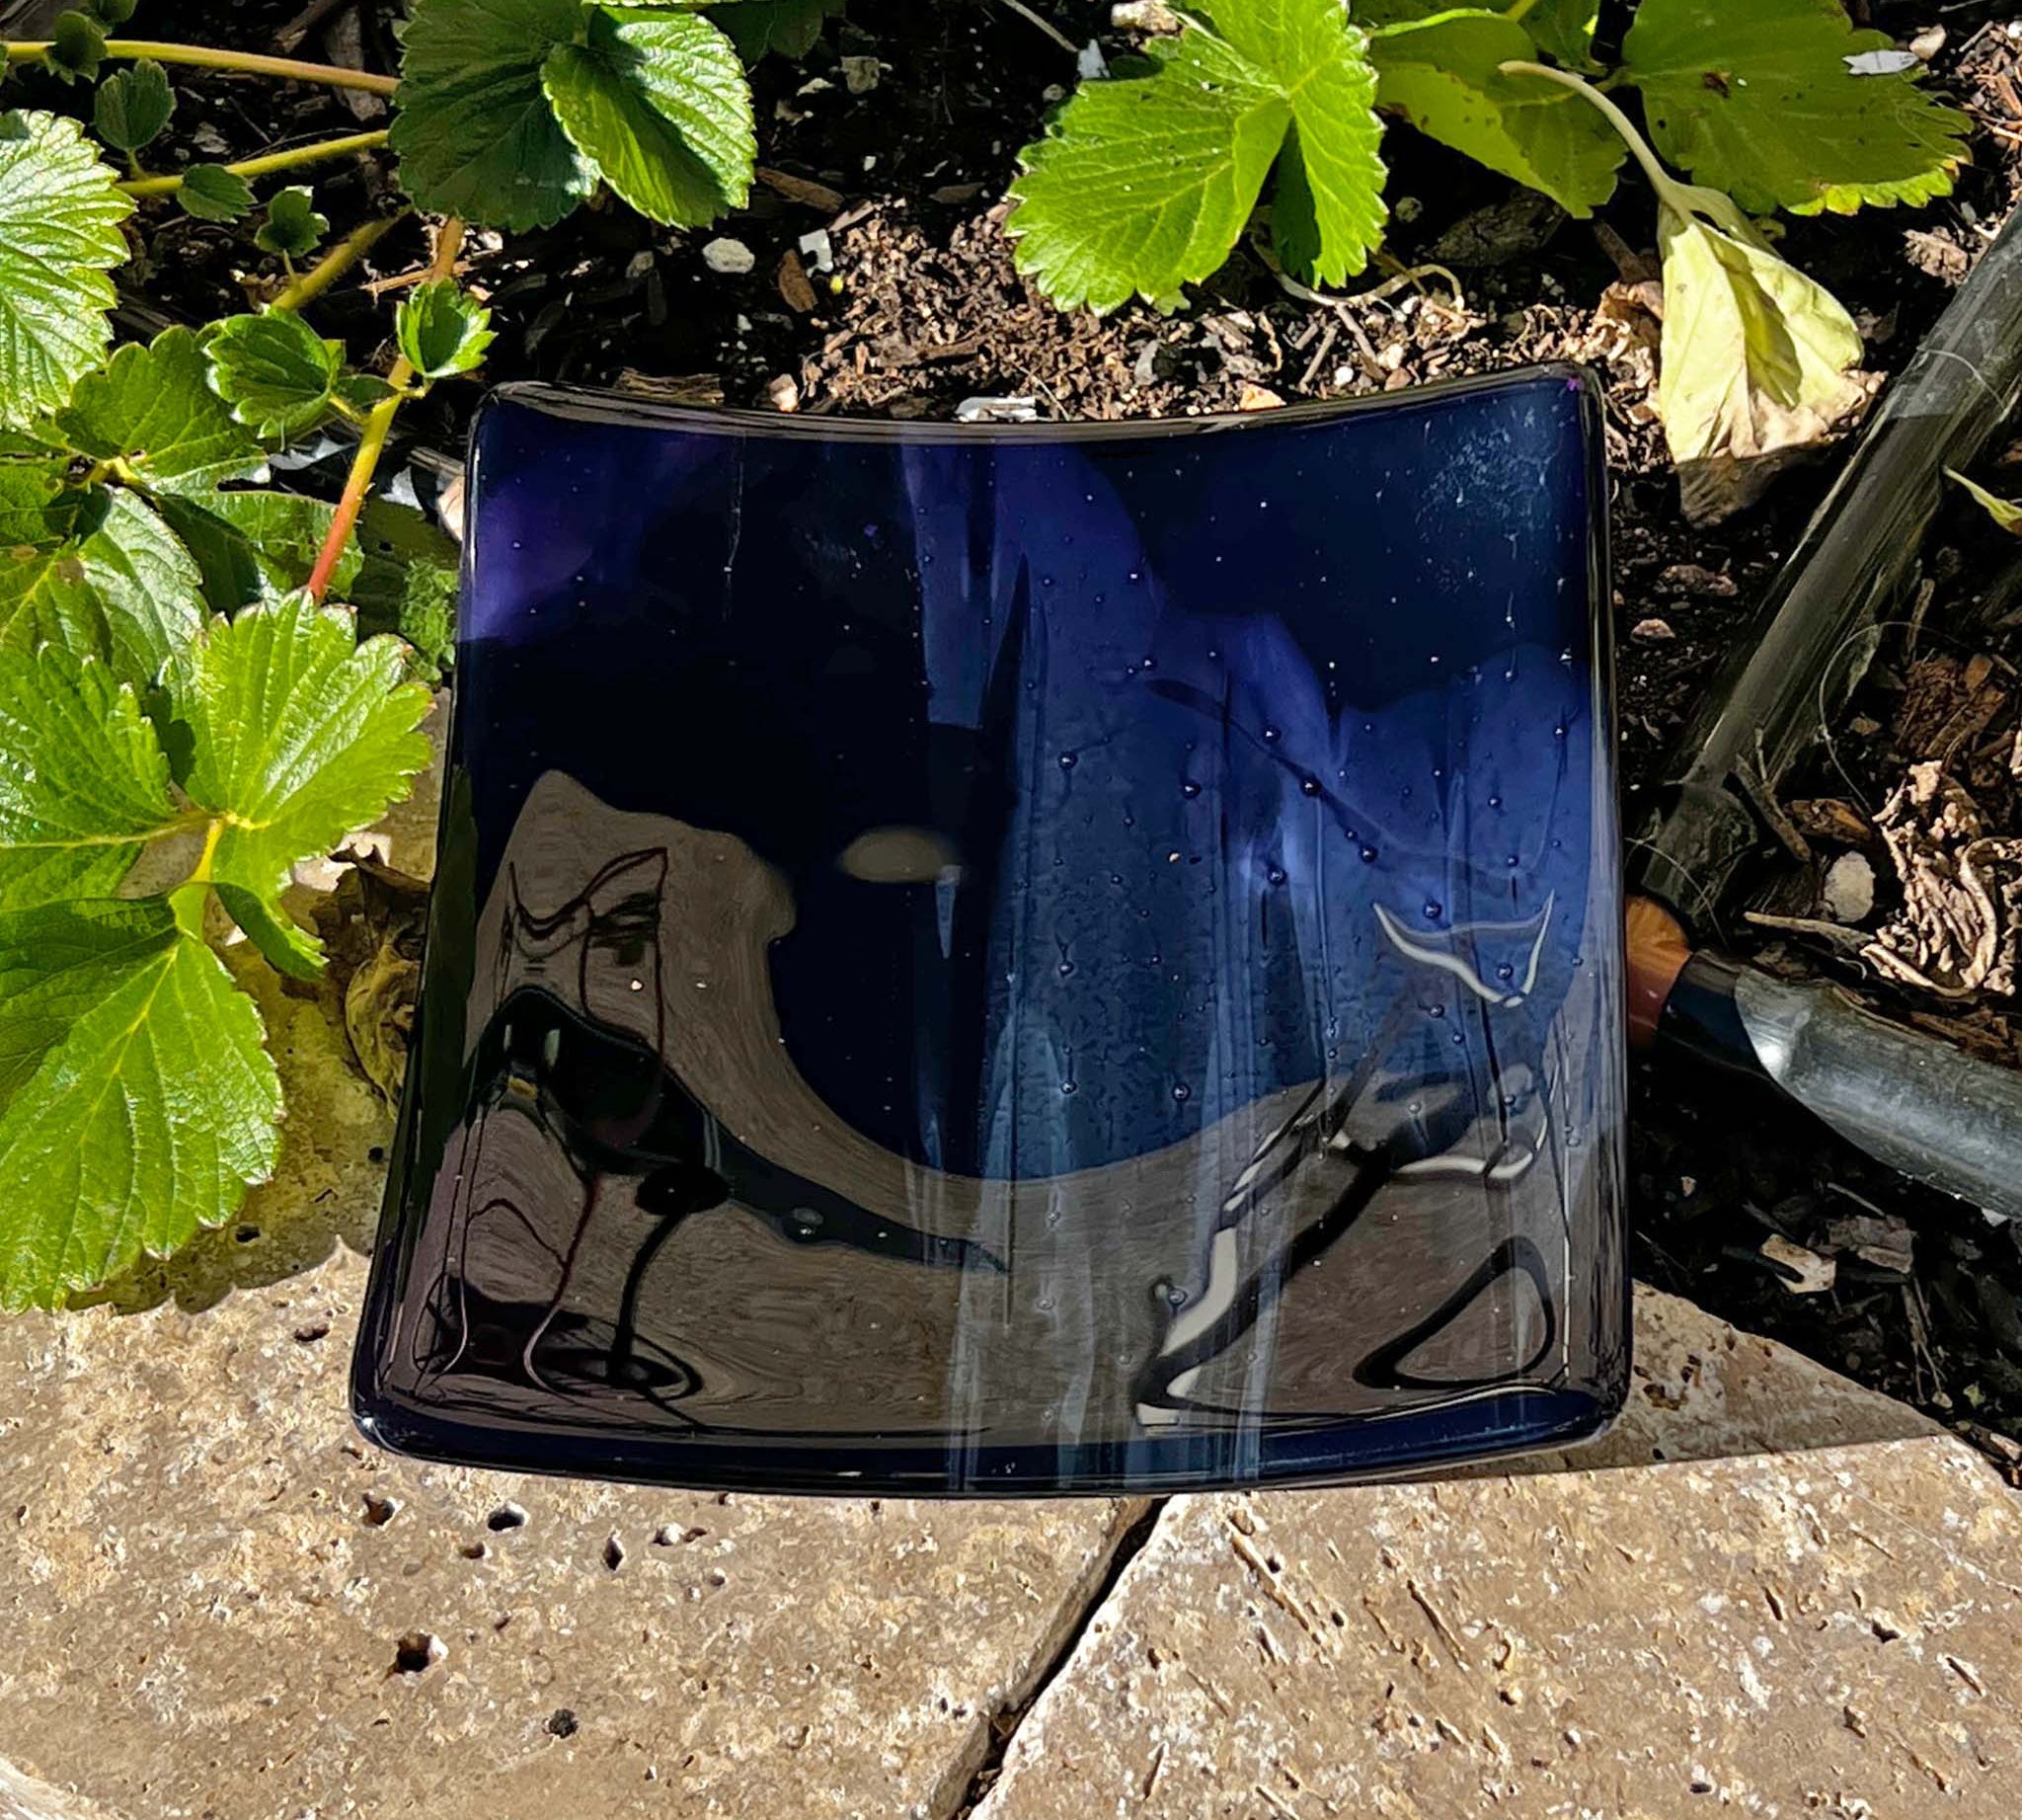 Deep purple glass dish, six inches square, resting on pavers in strawberry garden.